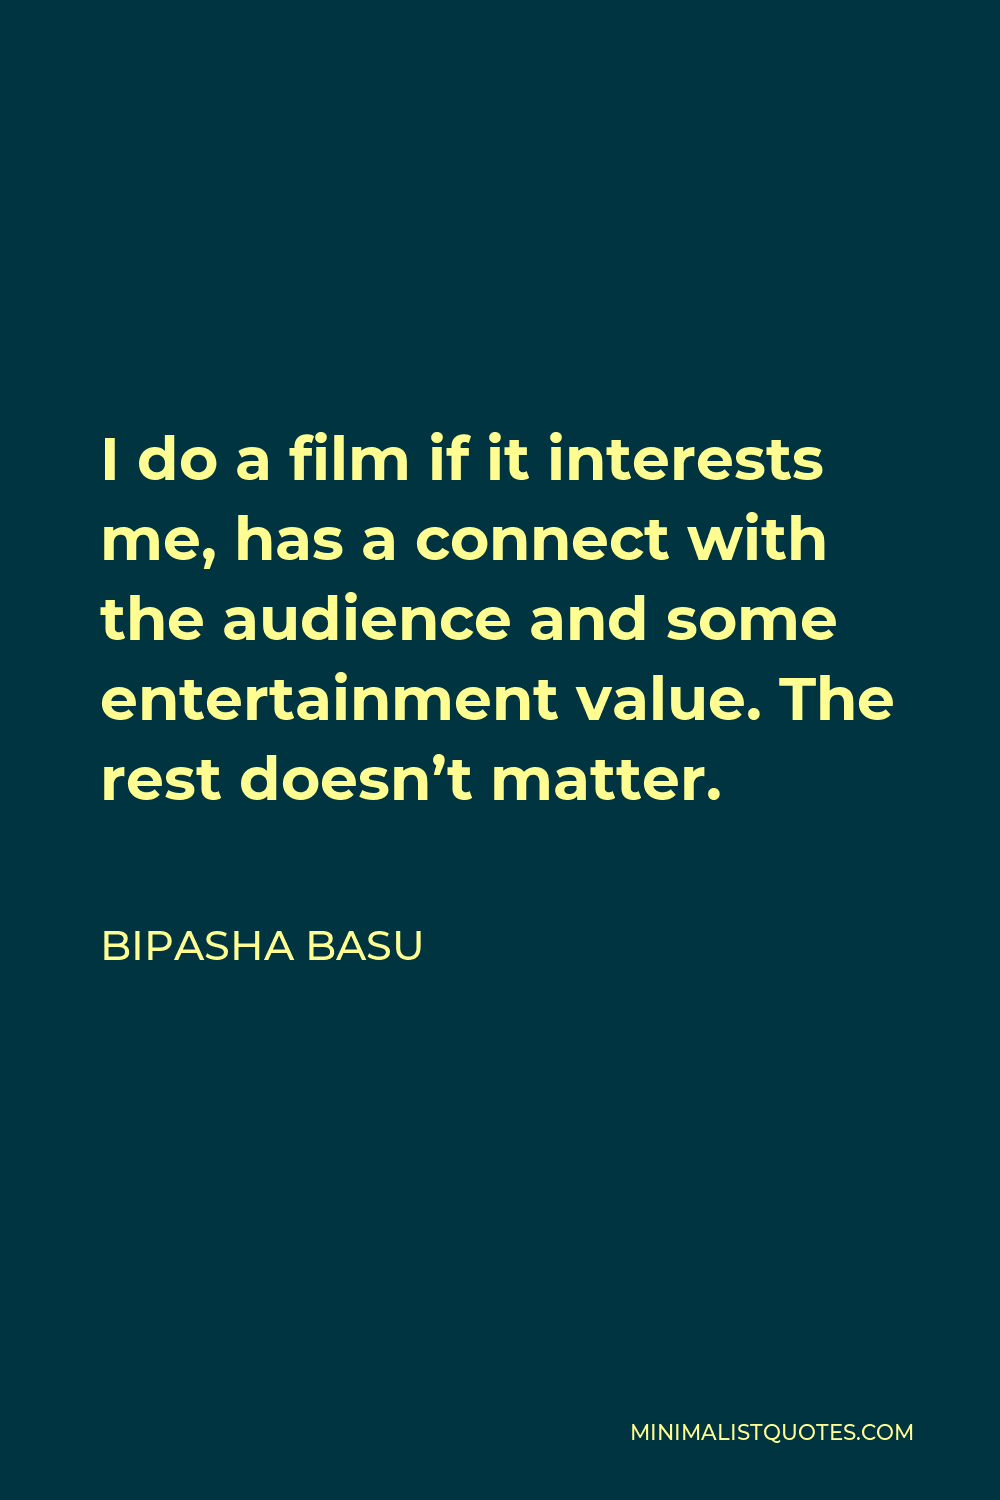 Bipasha Basu Quote - I do a film if it interests me, has a connect with the audience and some entertainment value. The rest doesn’t matter.